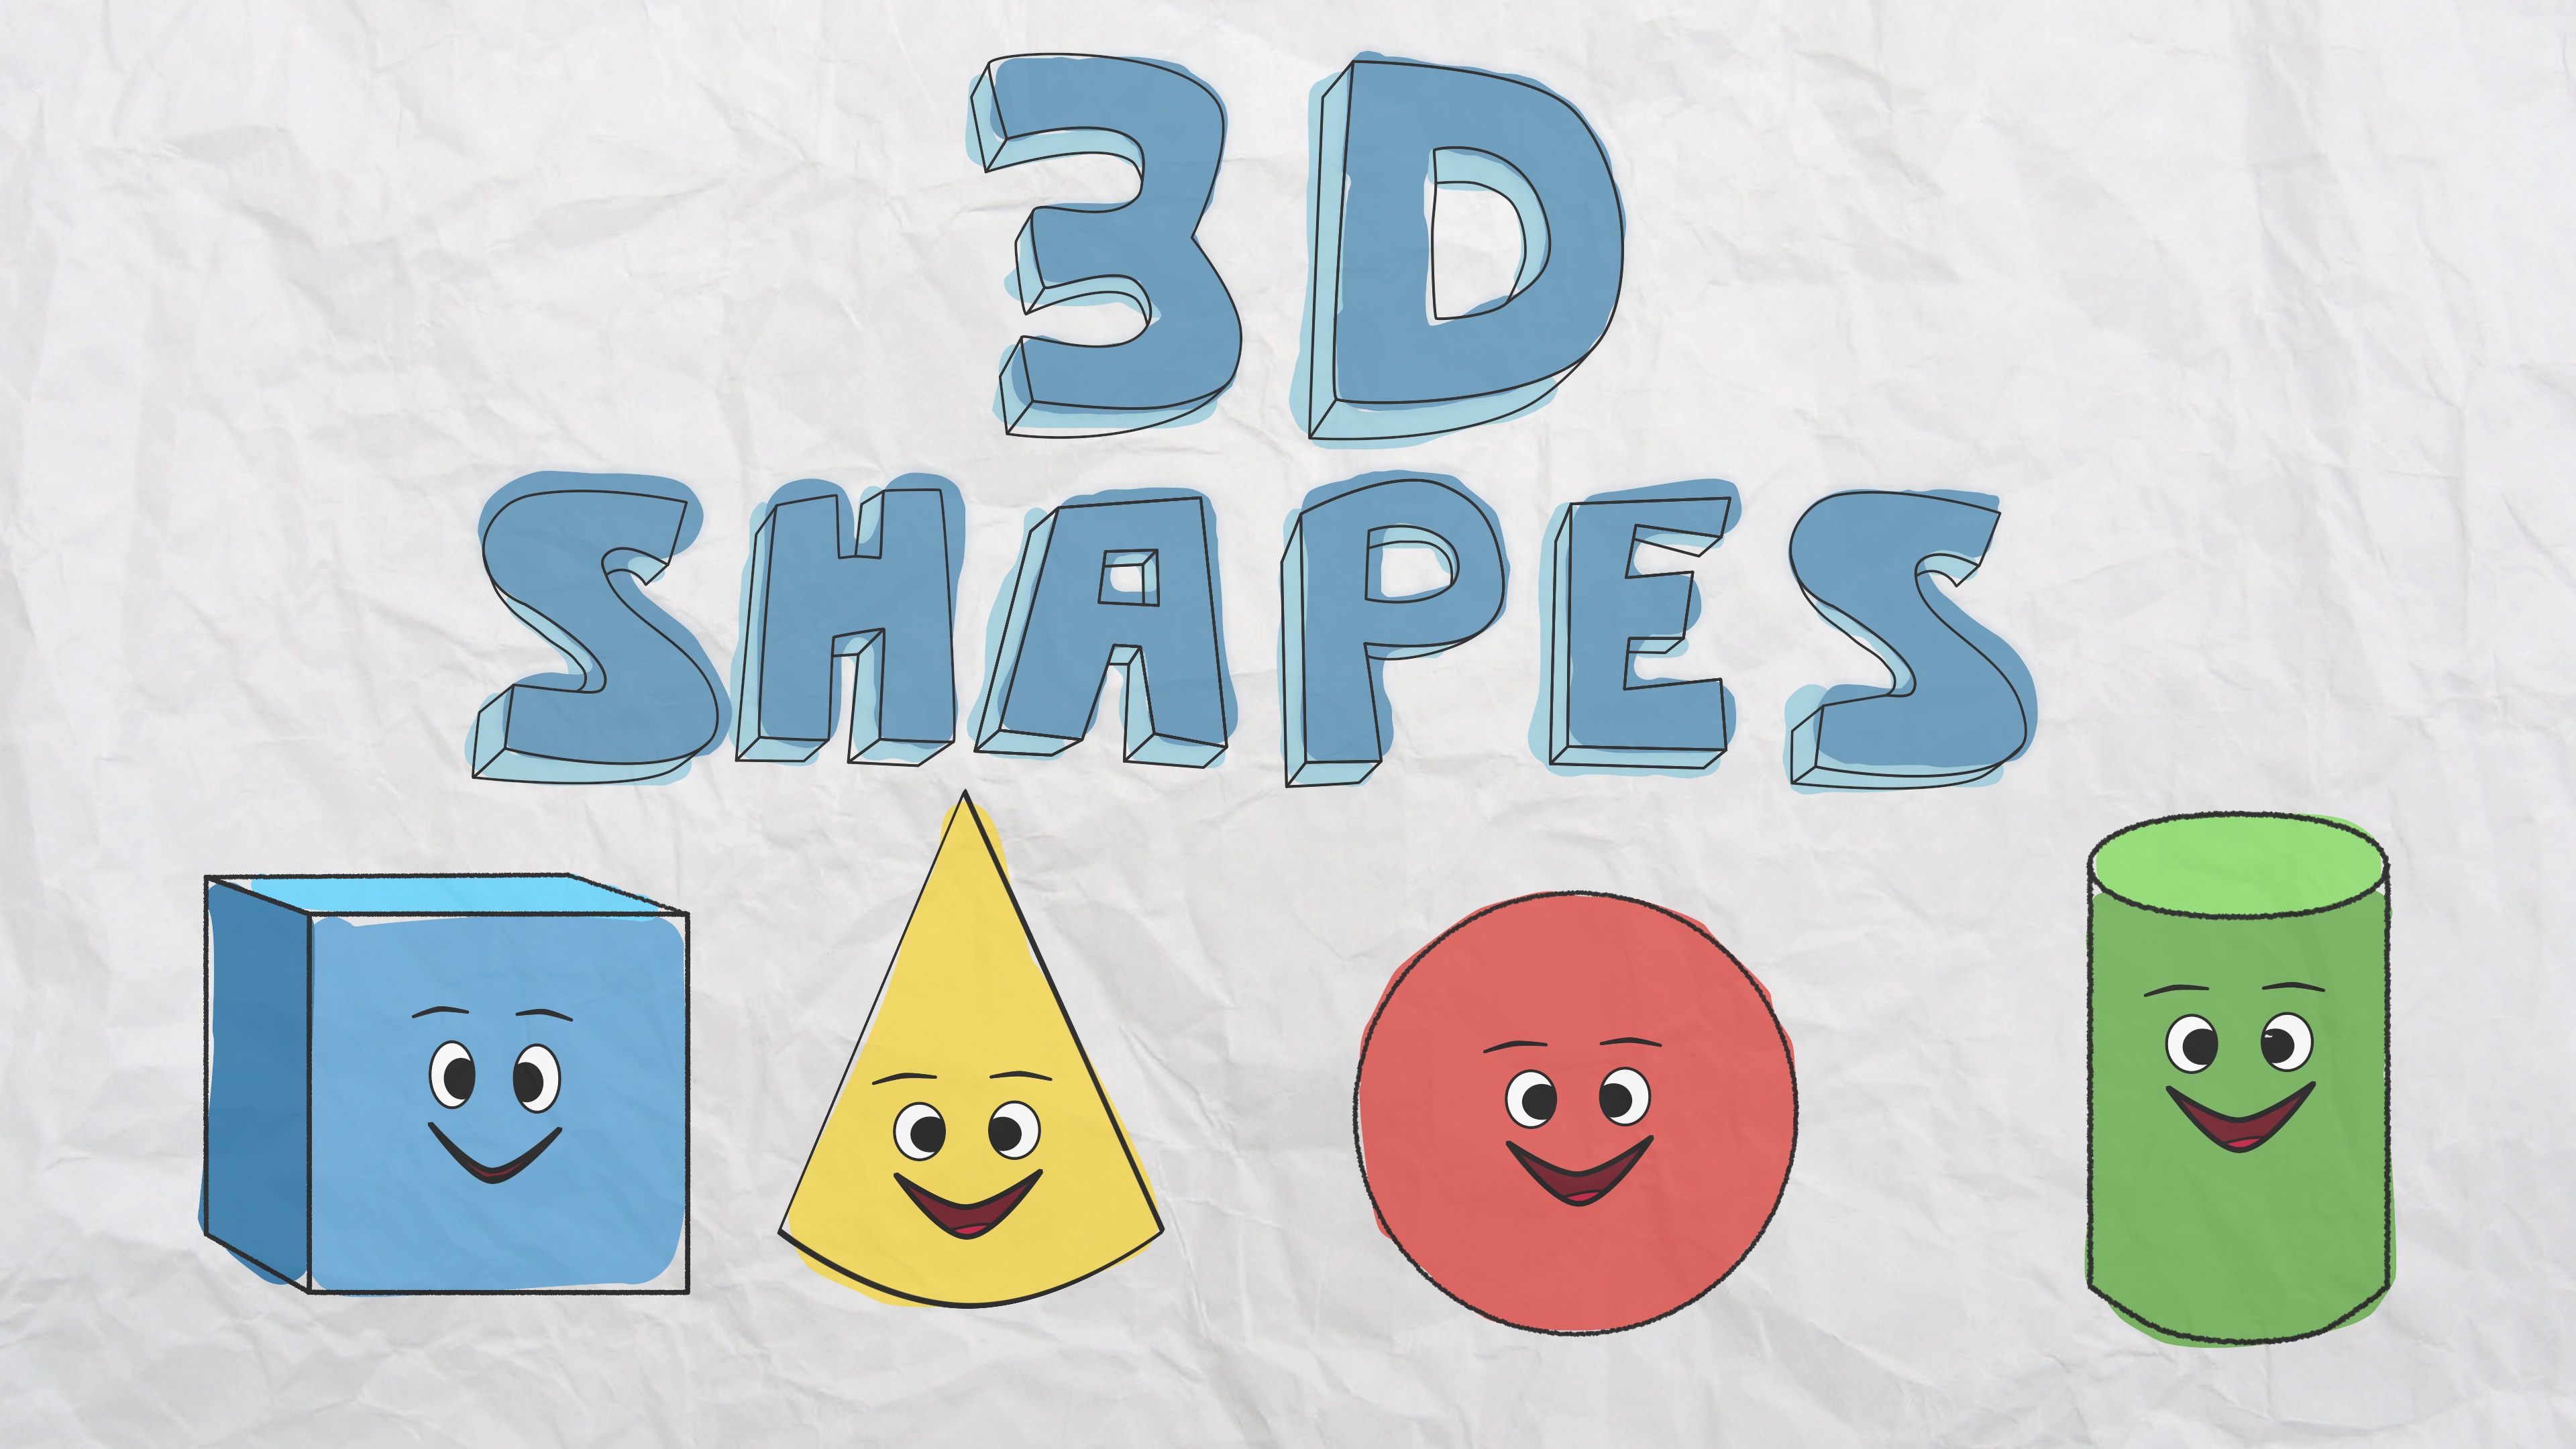 3d shapes song